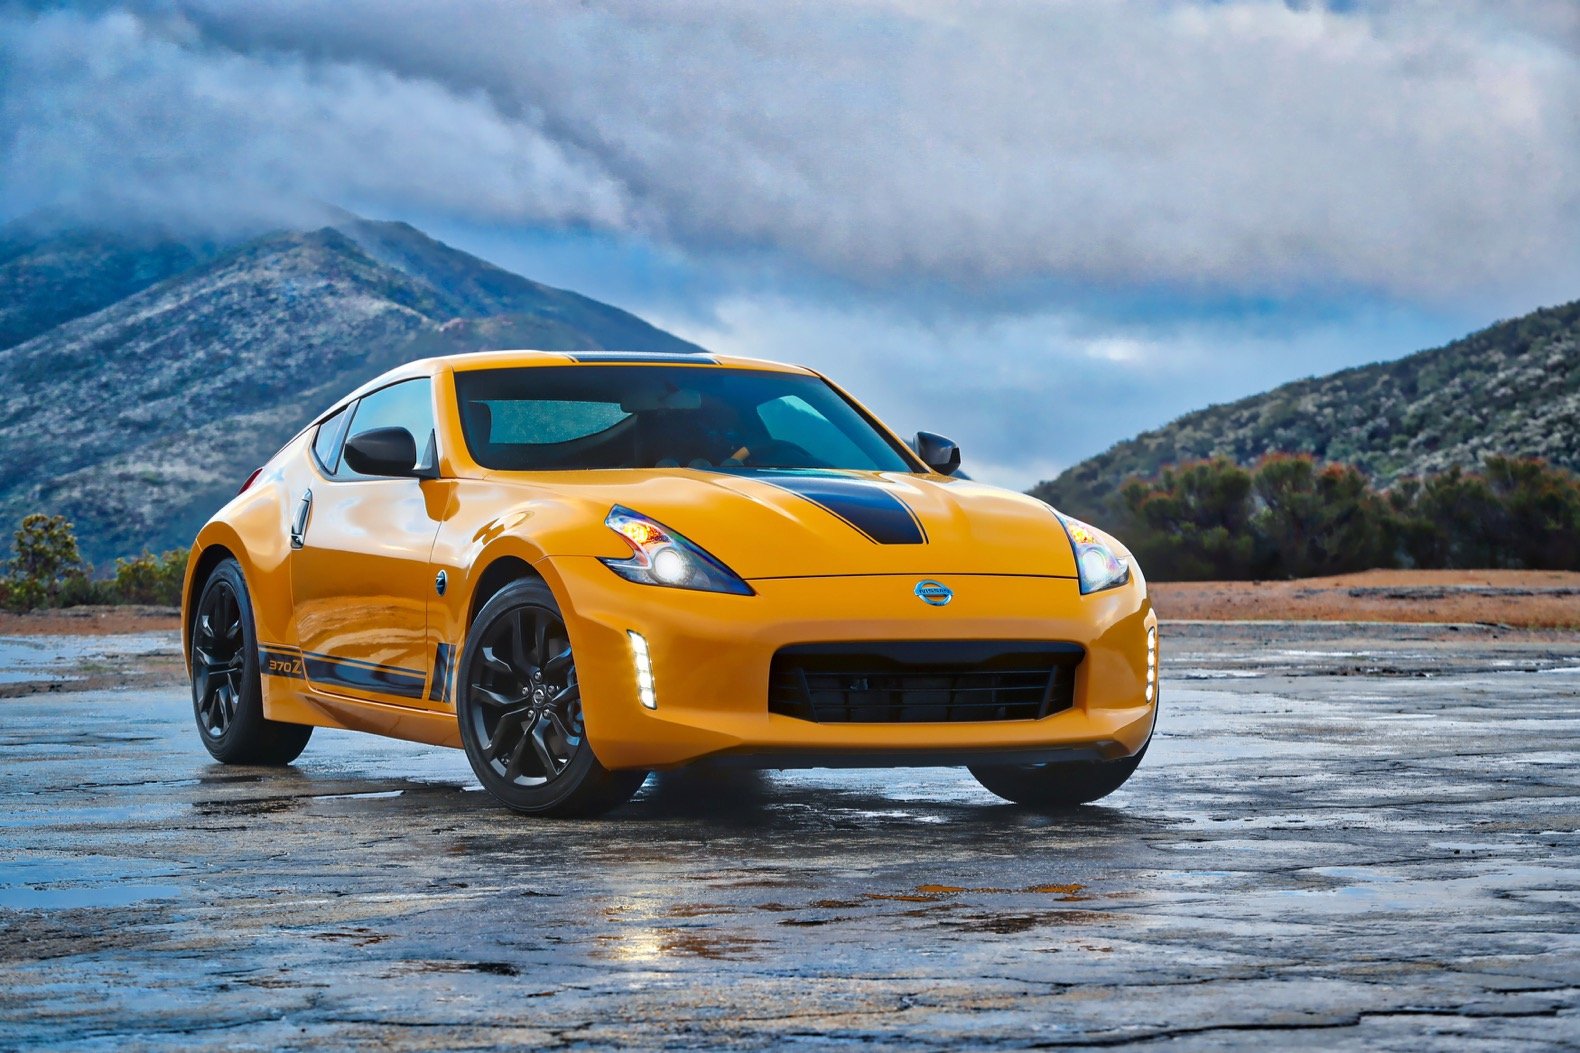 2018 Nissan 370Z Coupe Heritage Edition revealed The